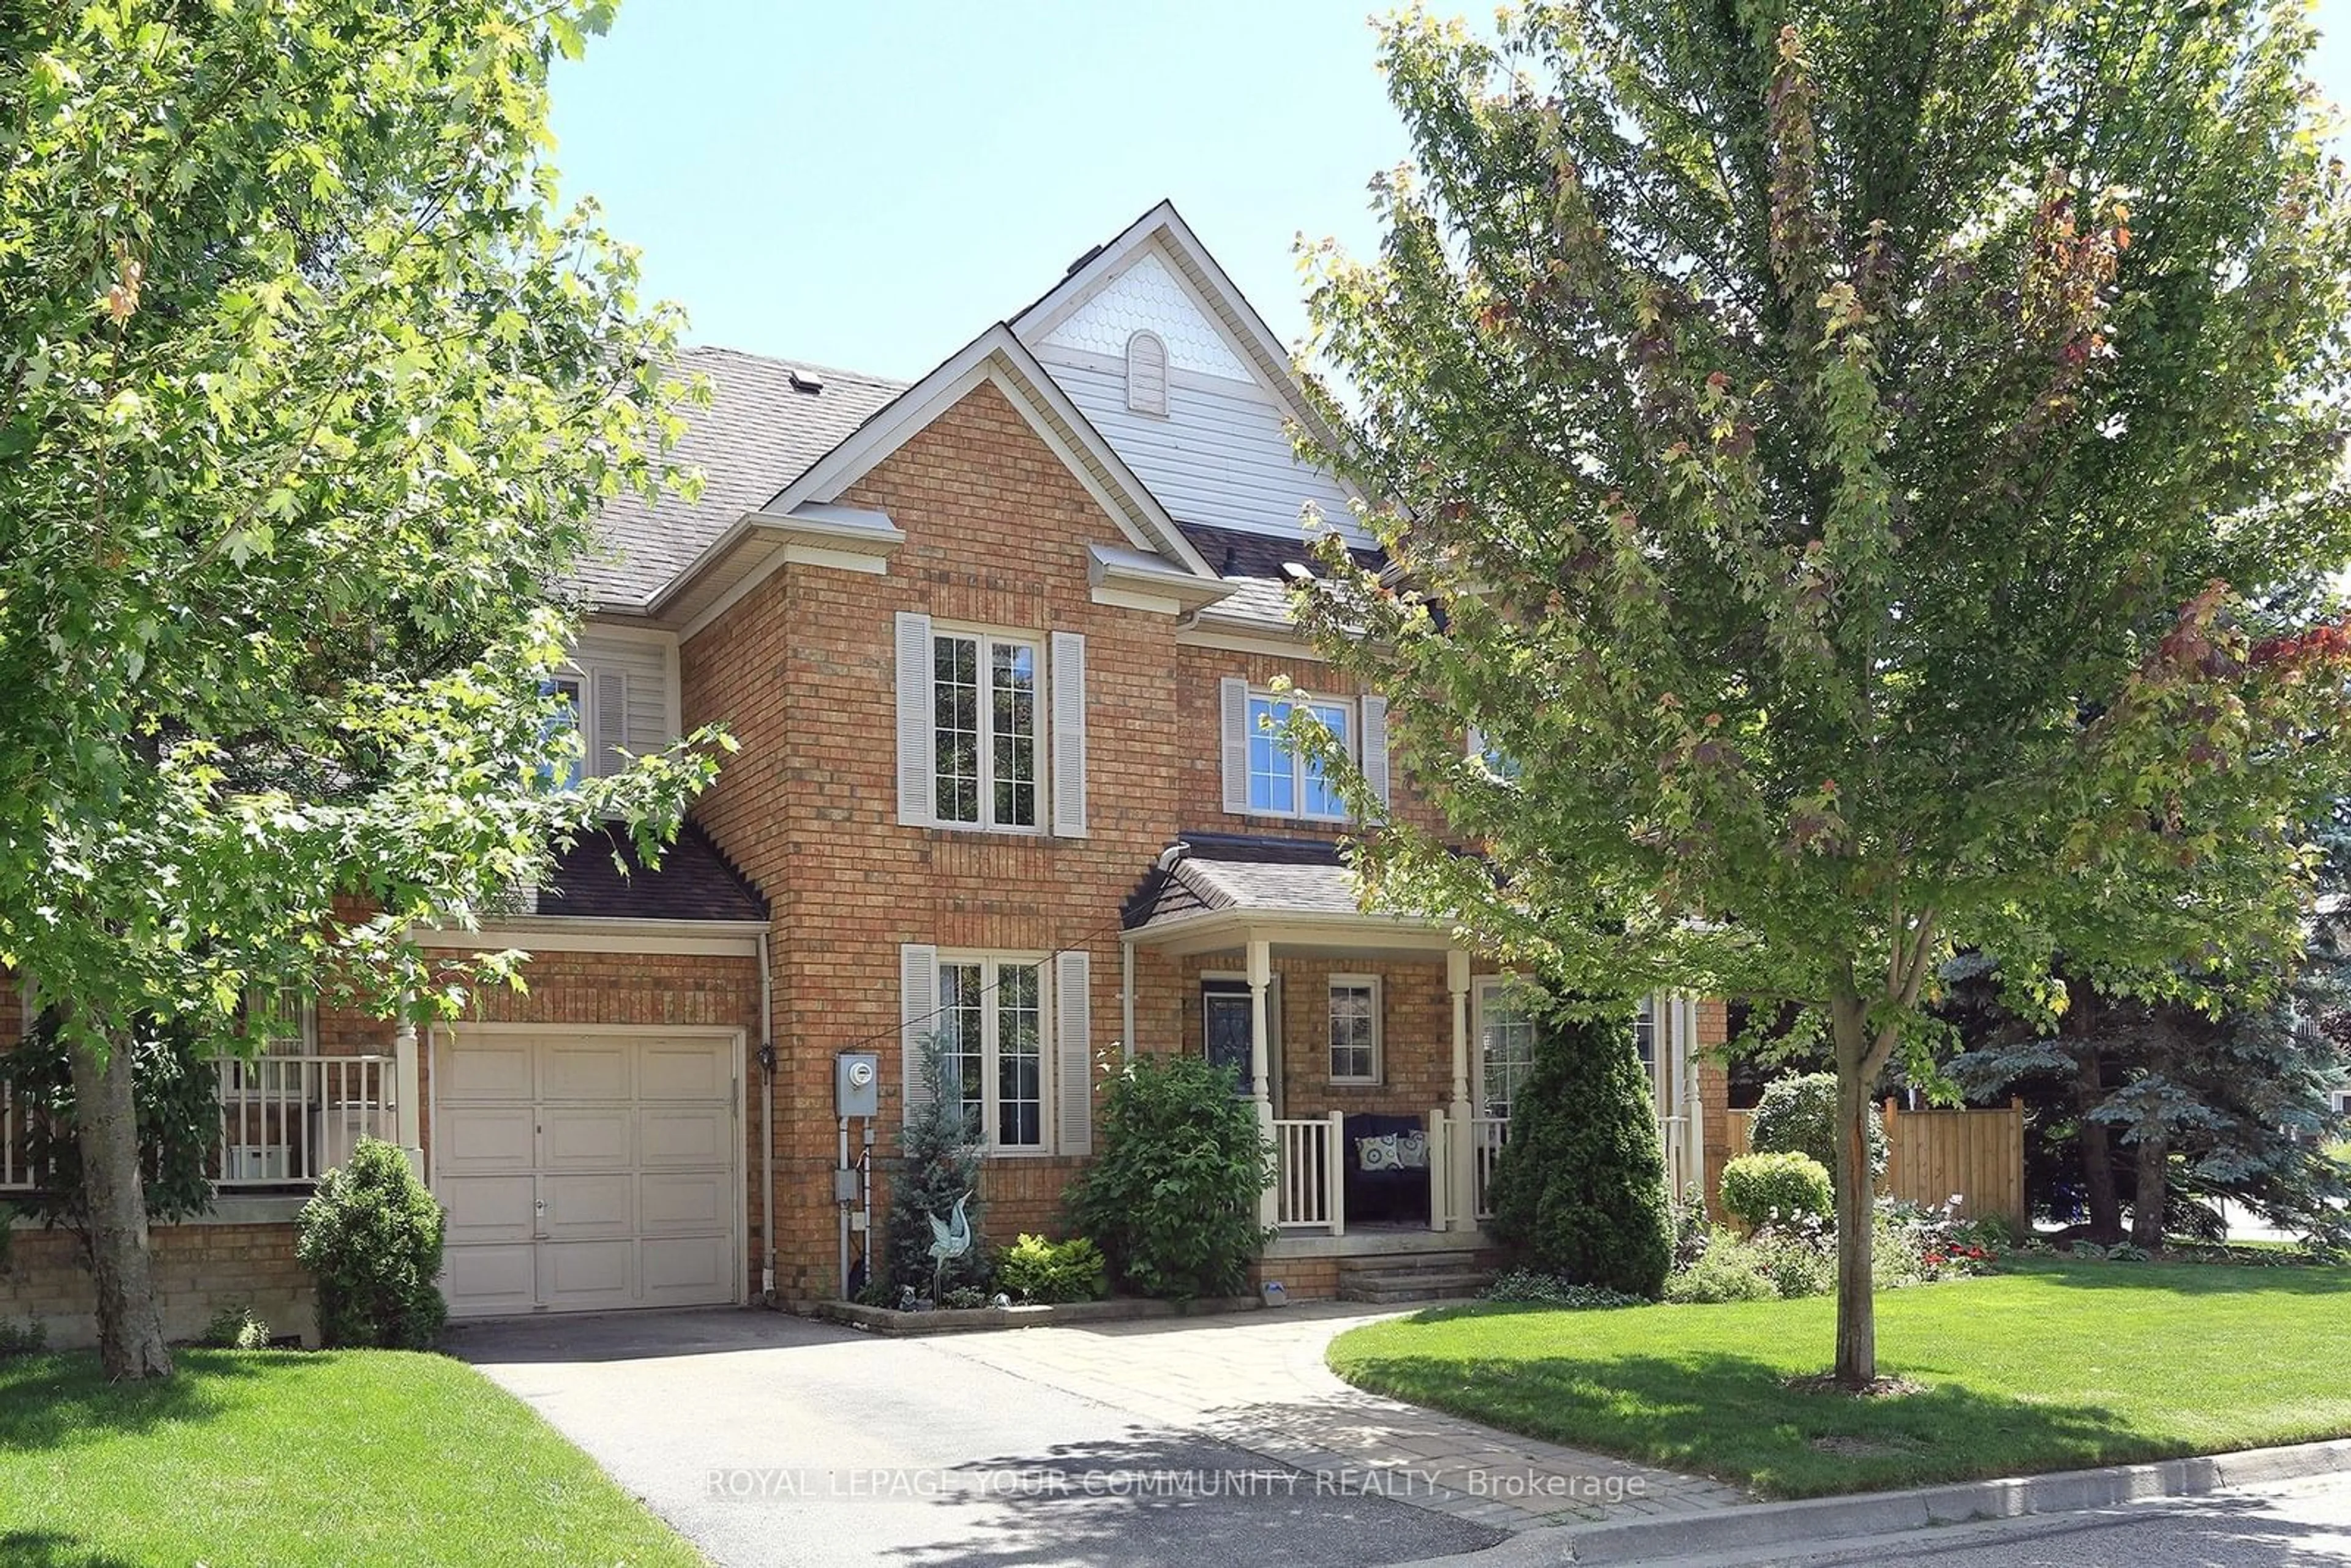 Home with brick exterior material for 1 Steckley St, Aurora Ontario L4G 7K6